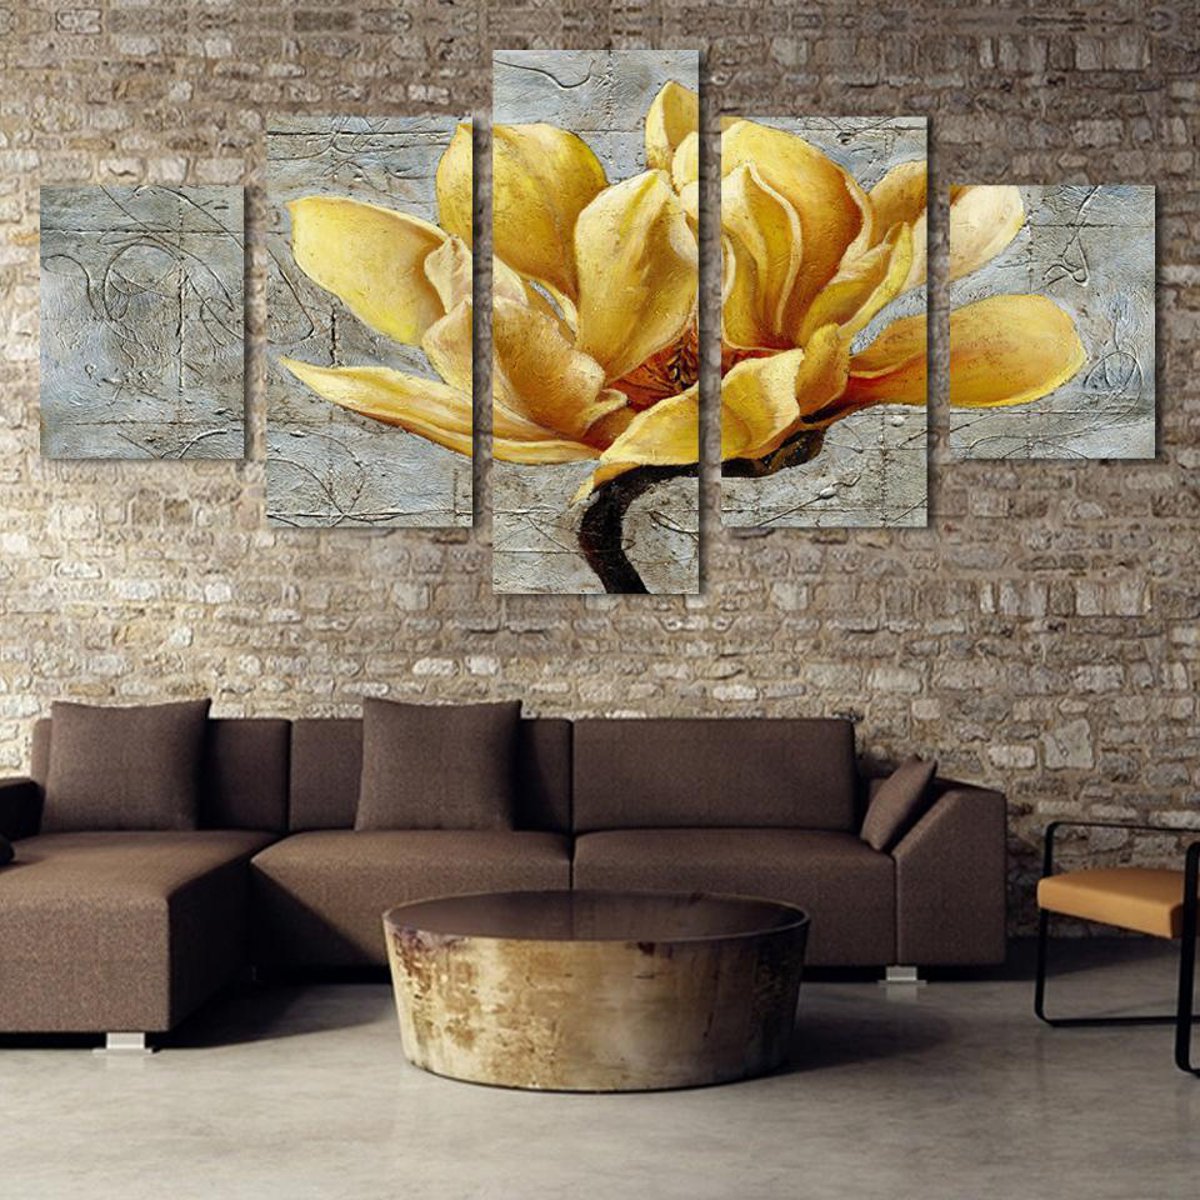 5Pcs-Unframed-Modern-Art-Oil-Paintings-Print-Canvas-Picture-Home-Wall-Room-Decor-1639651-1